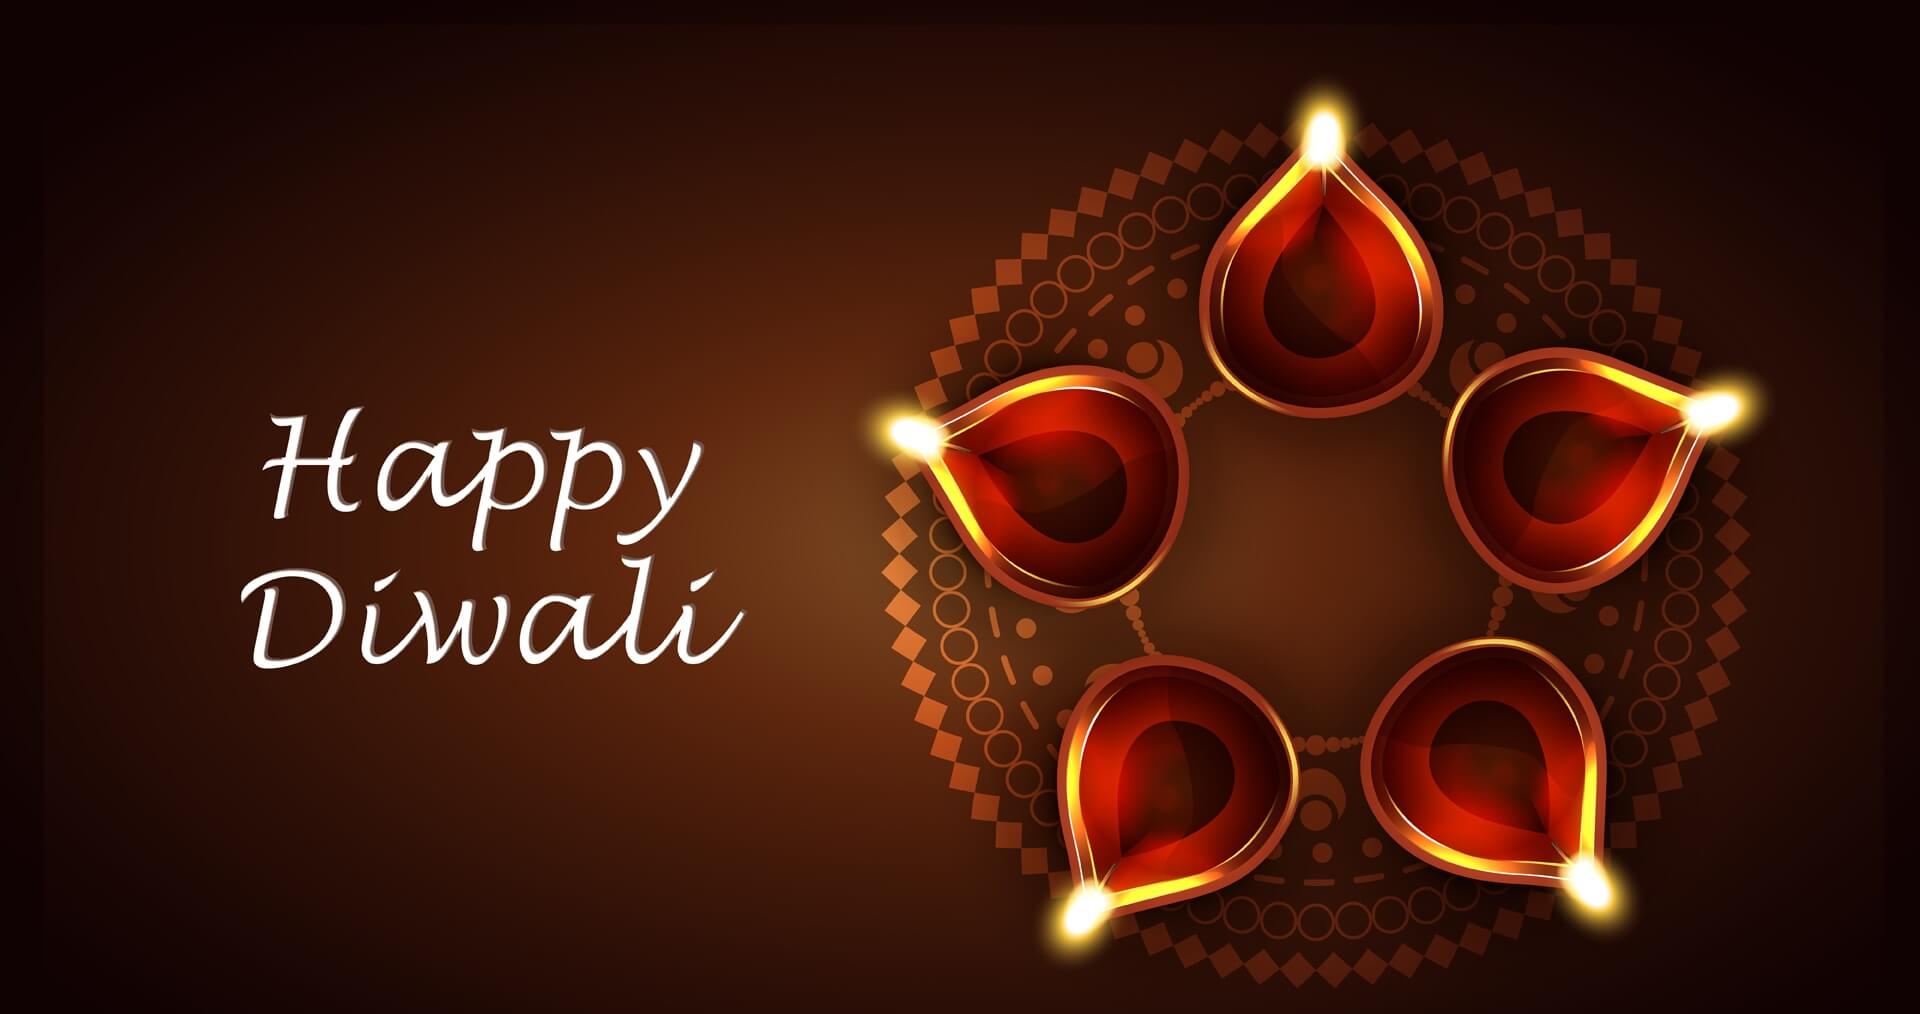 100+) Happy Diwali 2021, Wishes, HD Wallpaper, Messages, Greeting Cards